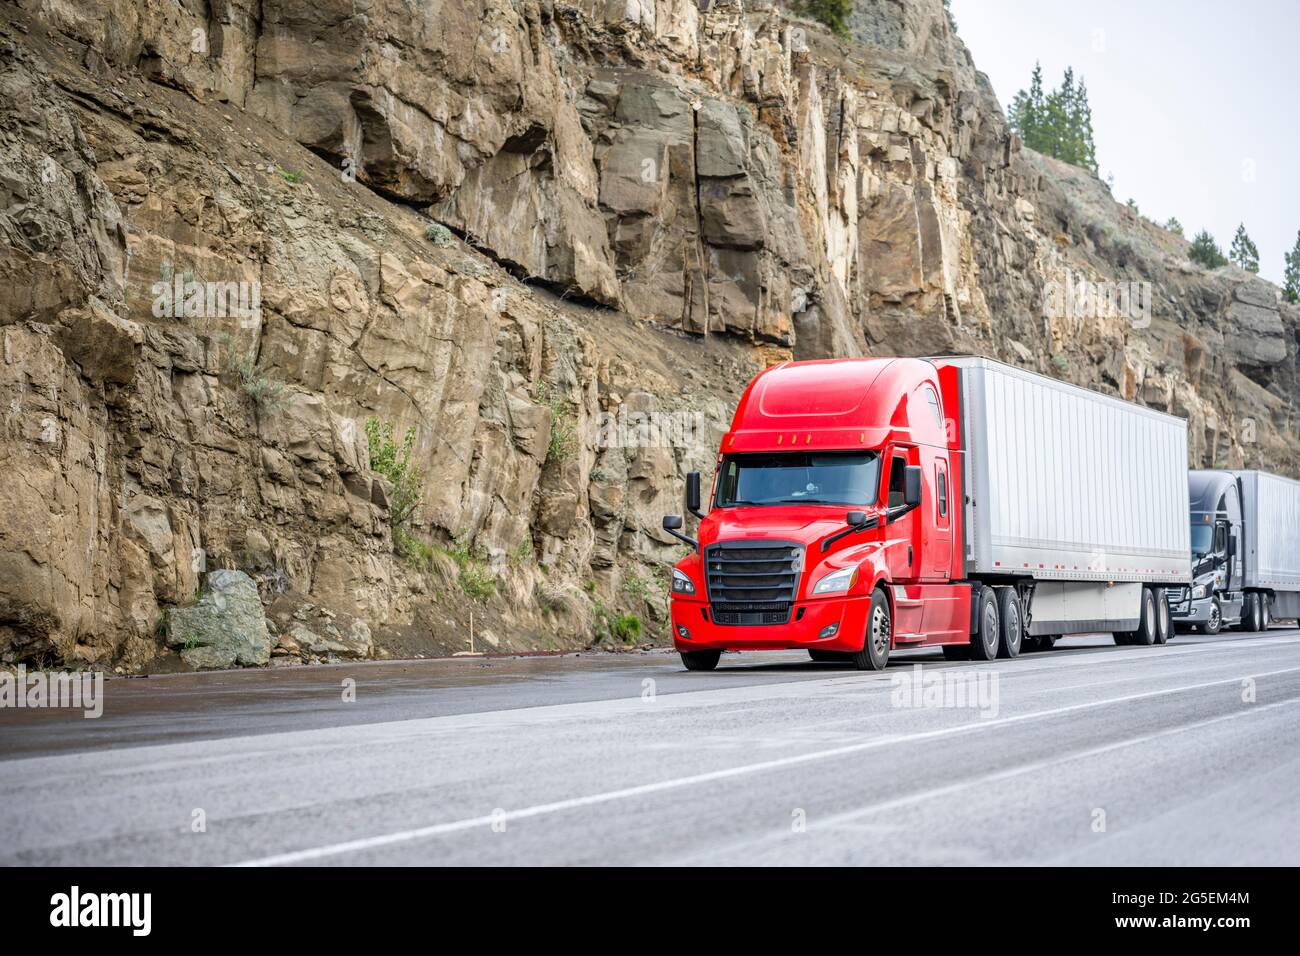 Group of big rigs semi trucks tractors transporting cargo in different semi trailers standing off road in a line near a stone cliff take a break at th Stock Photo